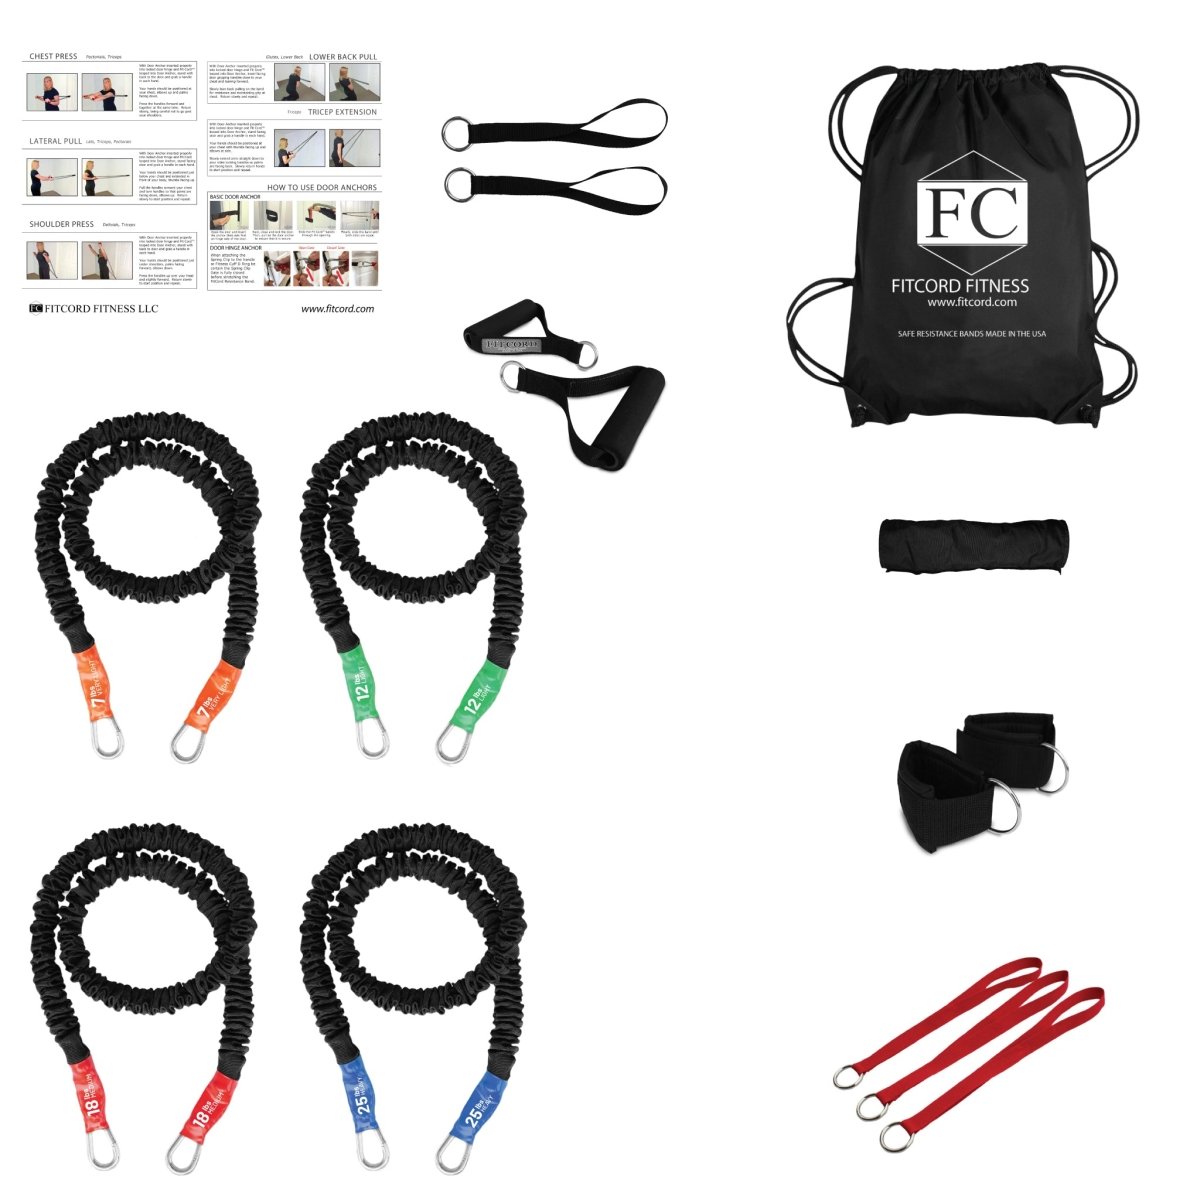 Stackable exercise band home gym system. Covered for safety, doesnt take up space in your home and comes with 4 bands which puts the resistance level in your control by quickly changing and adjusting these stackable bands.